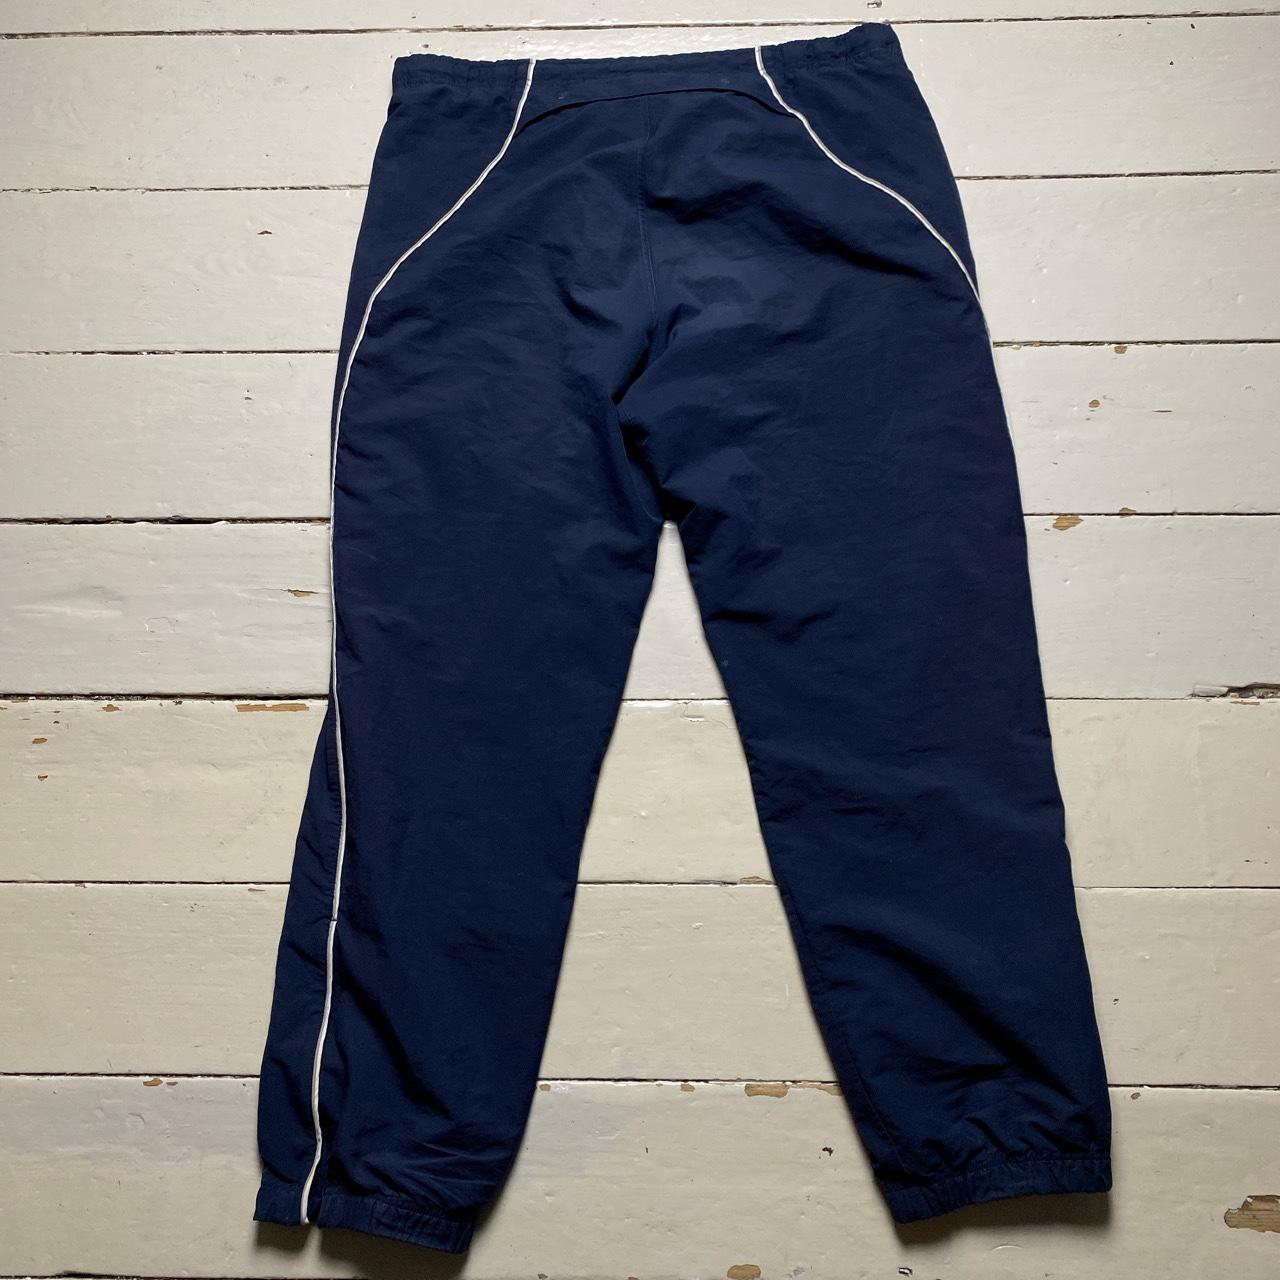 Nike Baggy Vintage Swoosh Shell Track Pants Navy and White